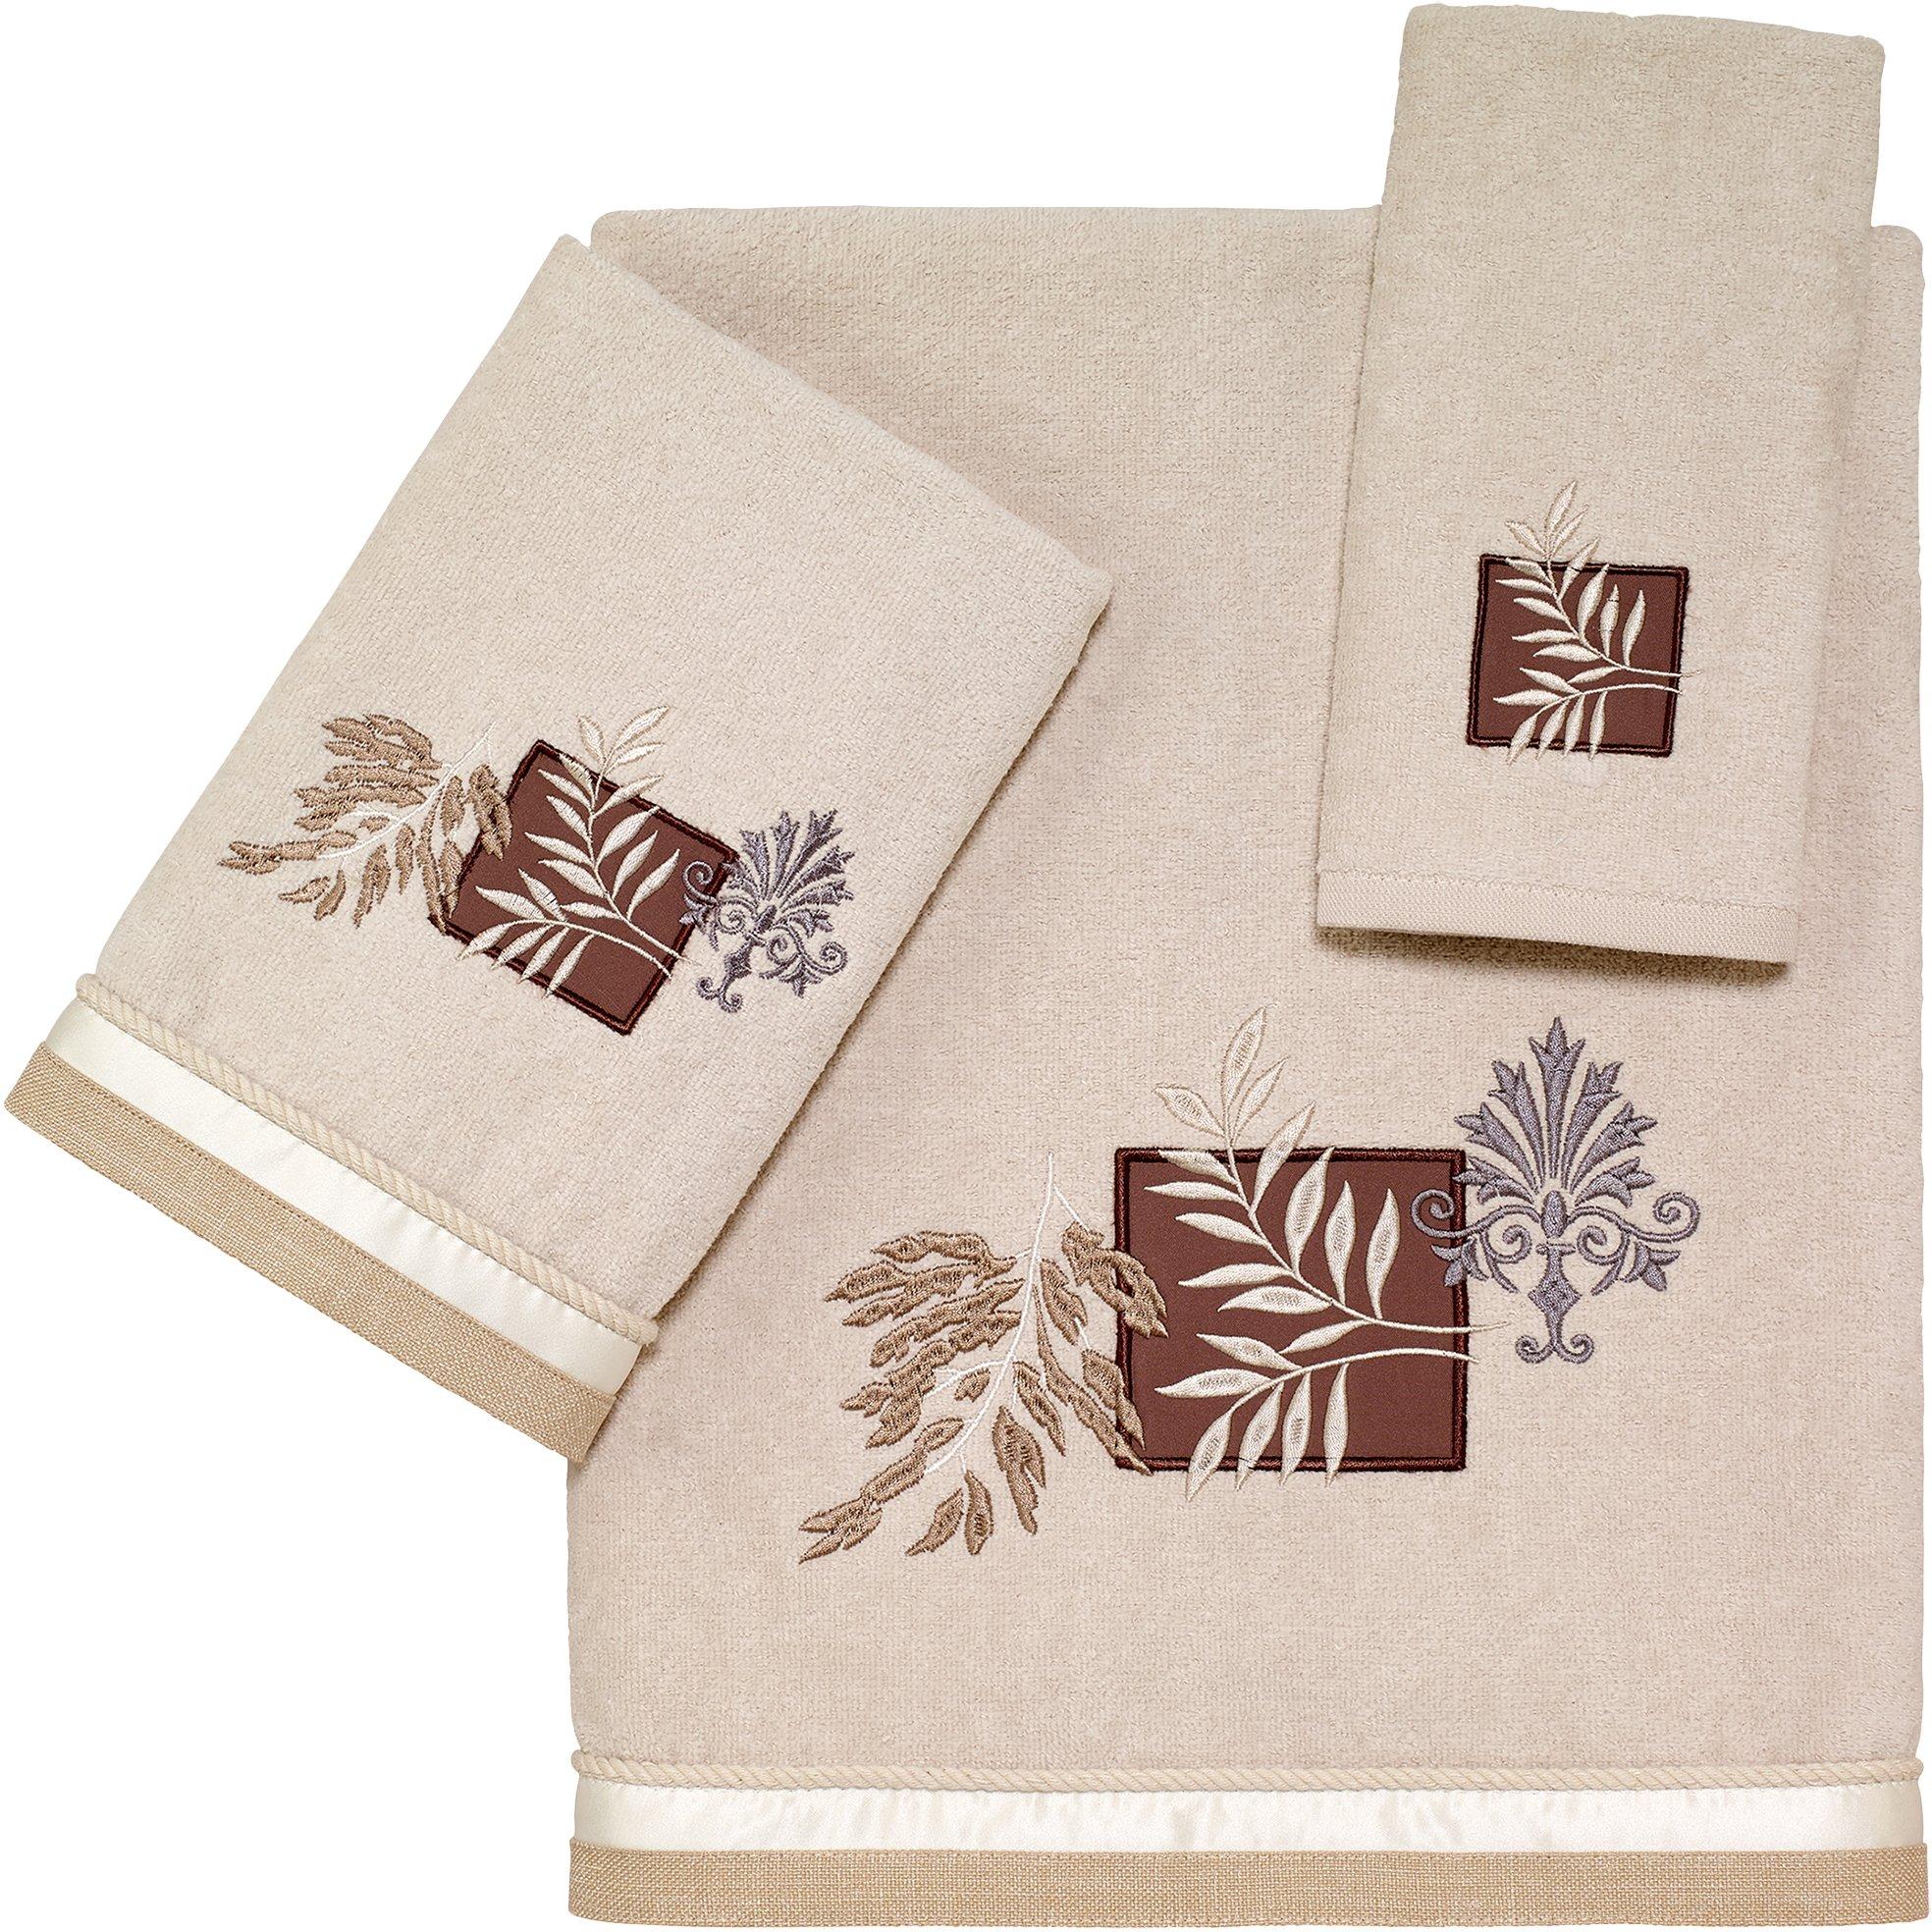 Serenity Towel Collection